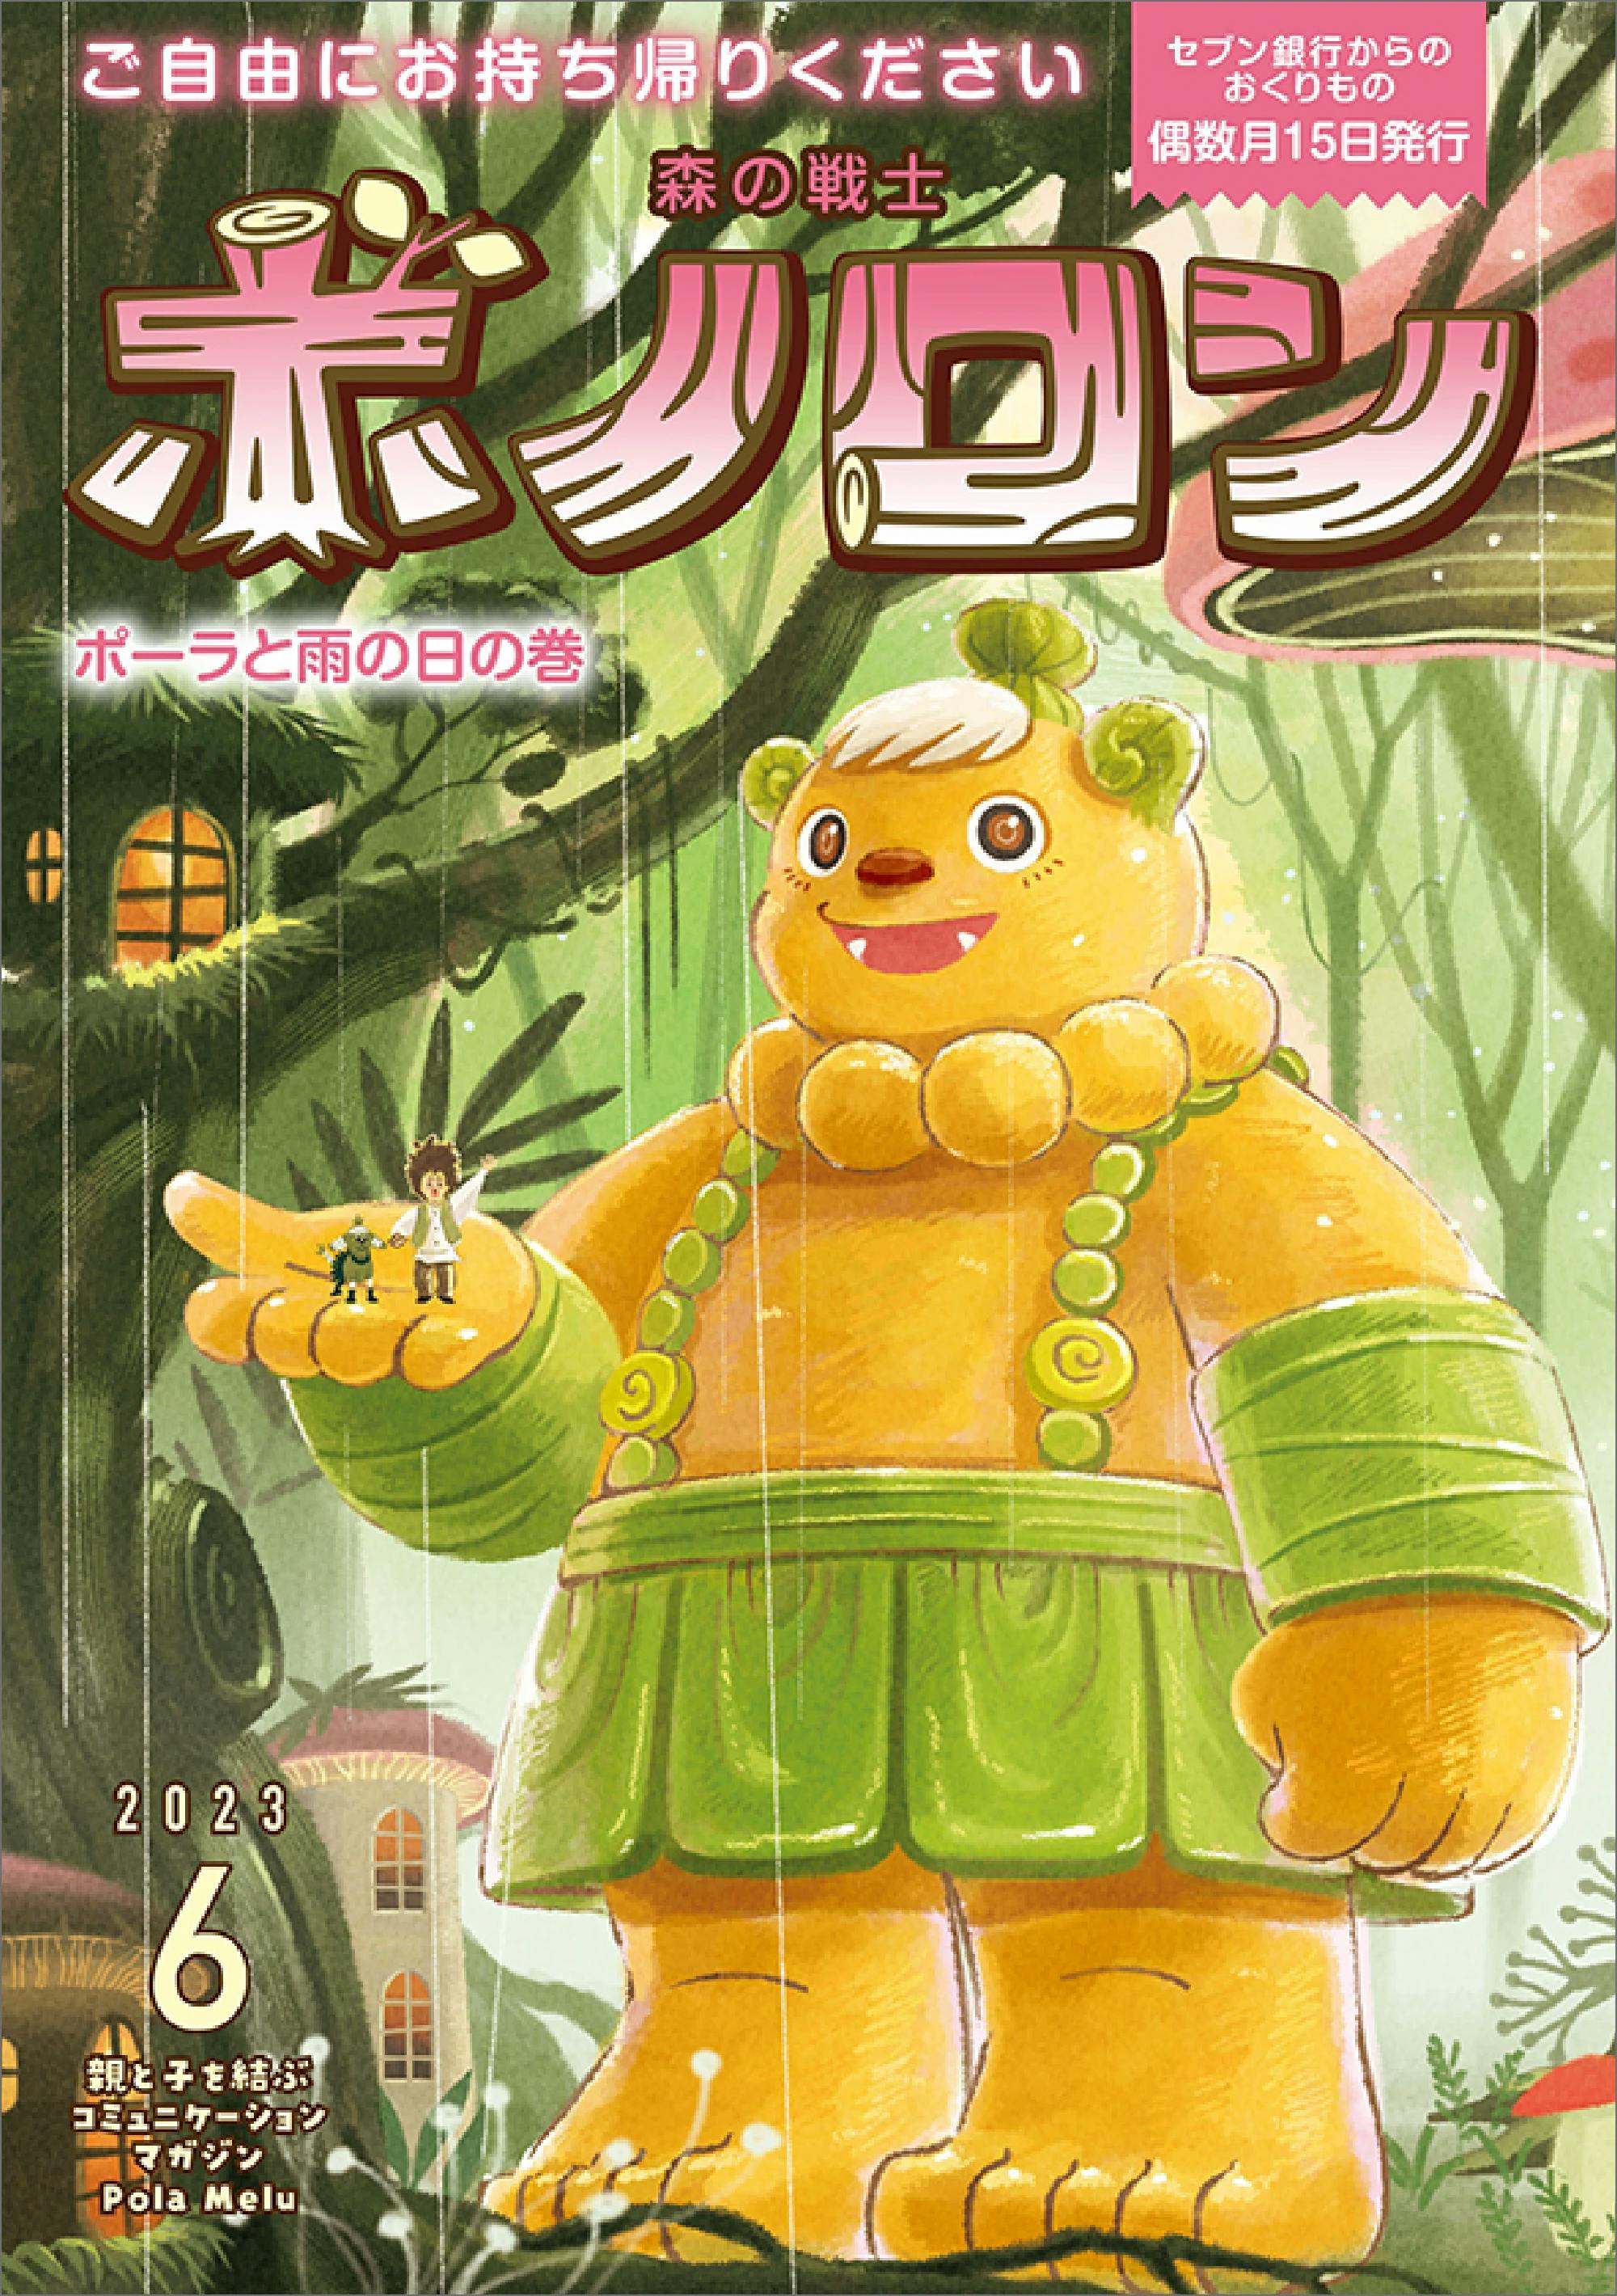 Forest Warrior Bonolon June issue “Paula and the Rainy Day Volume” is now being distributed!